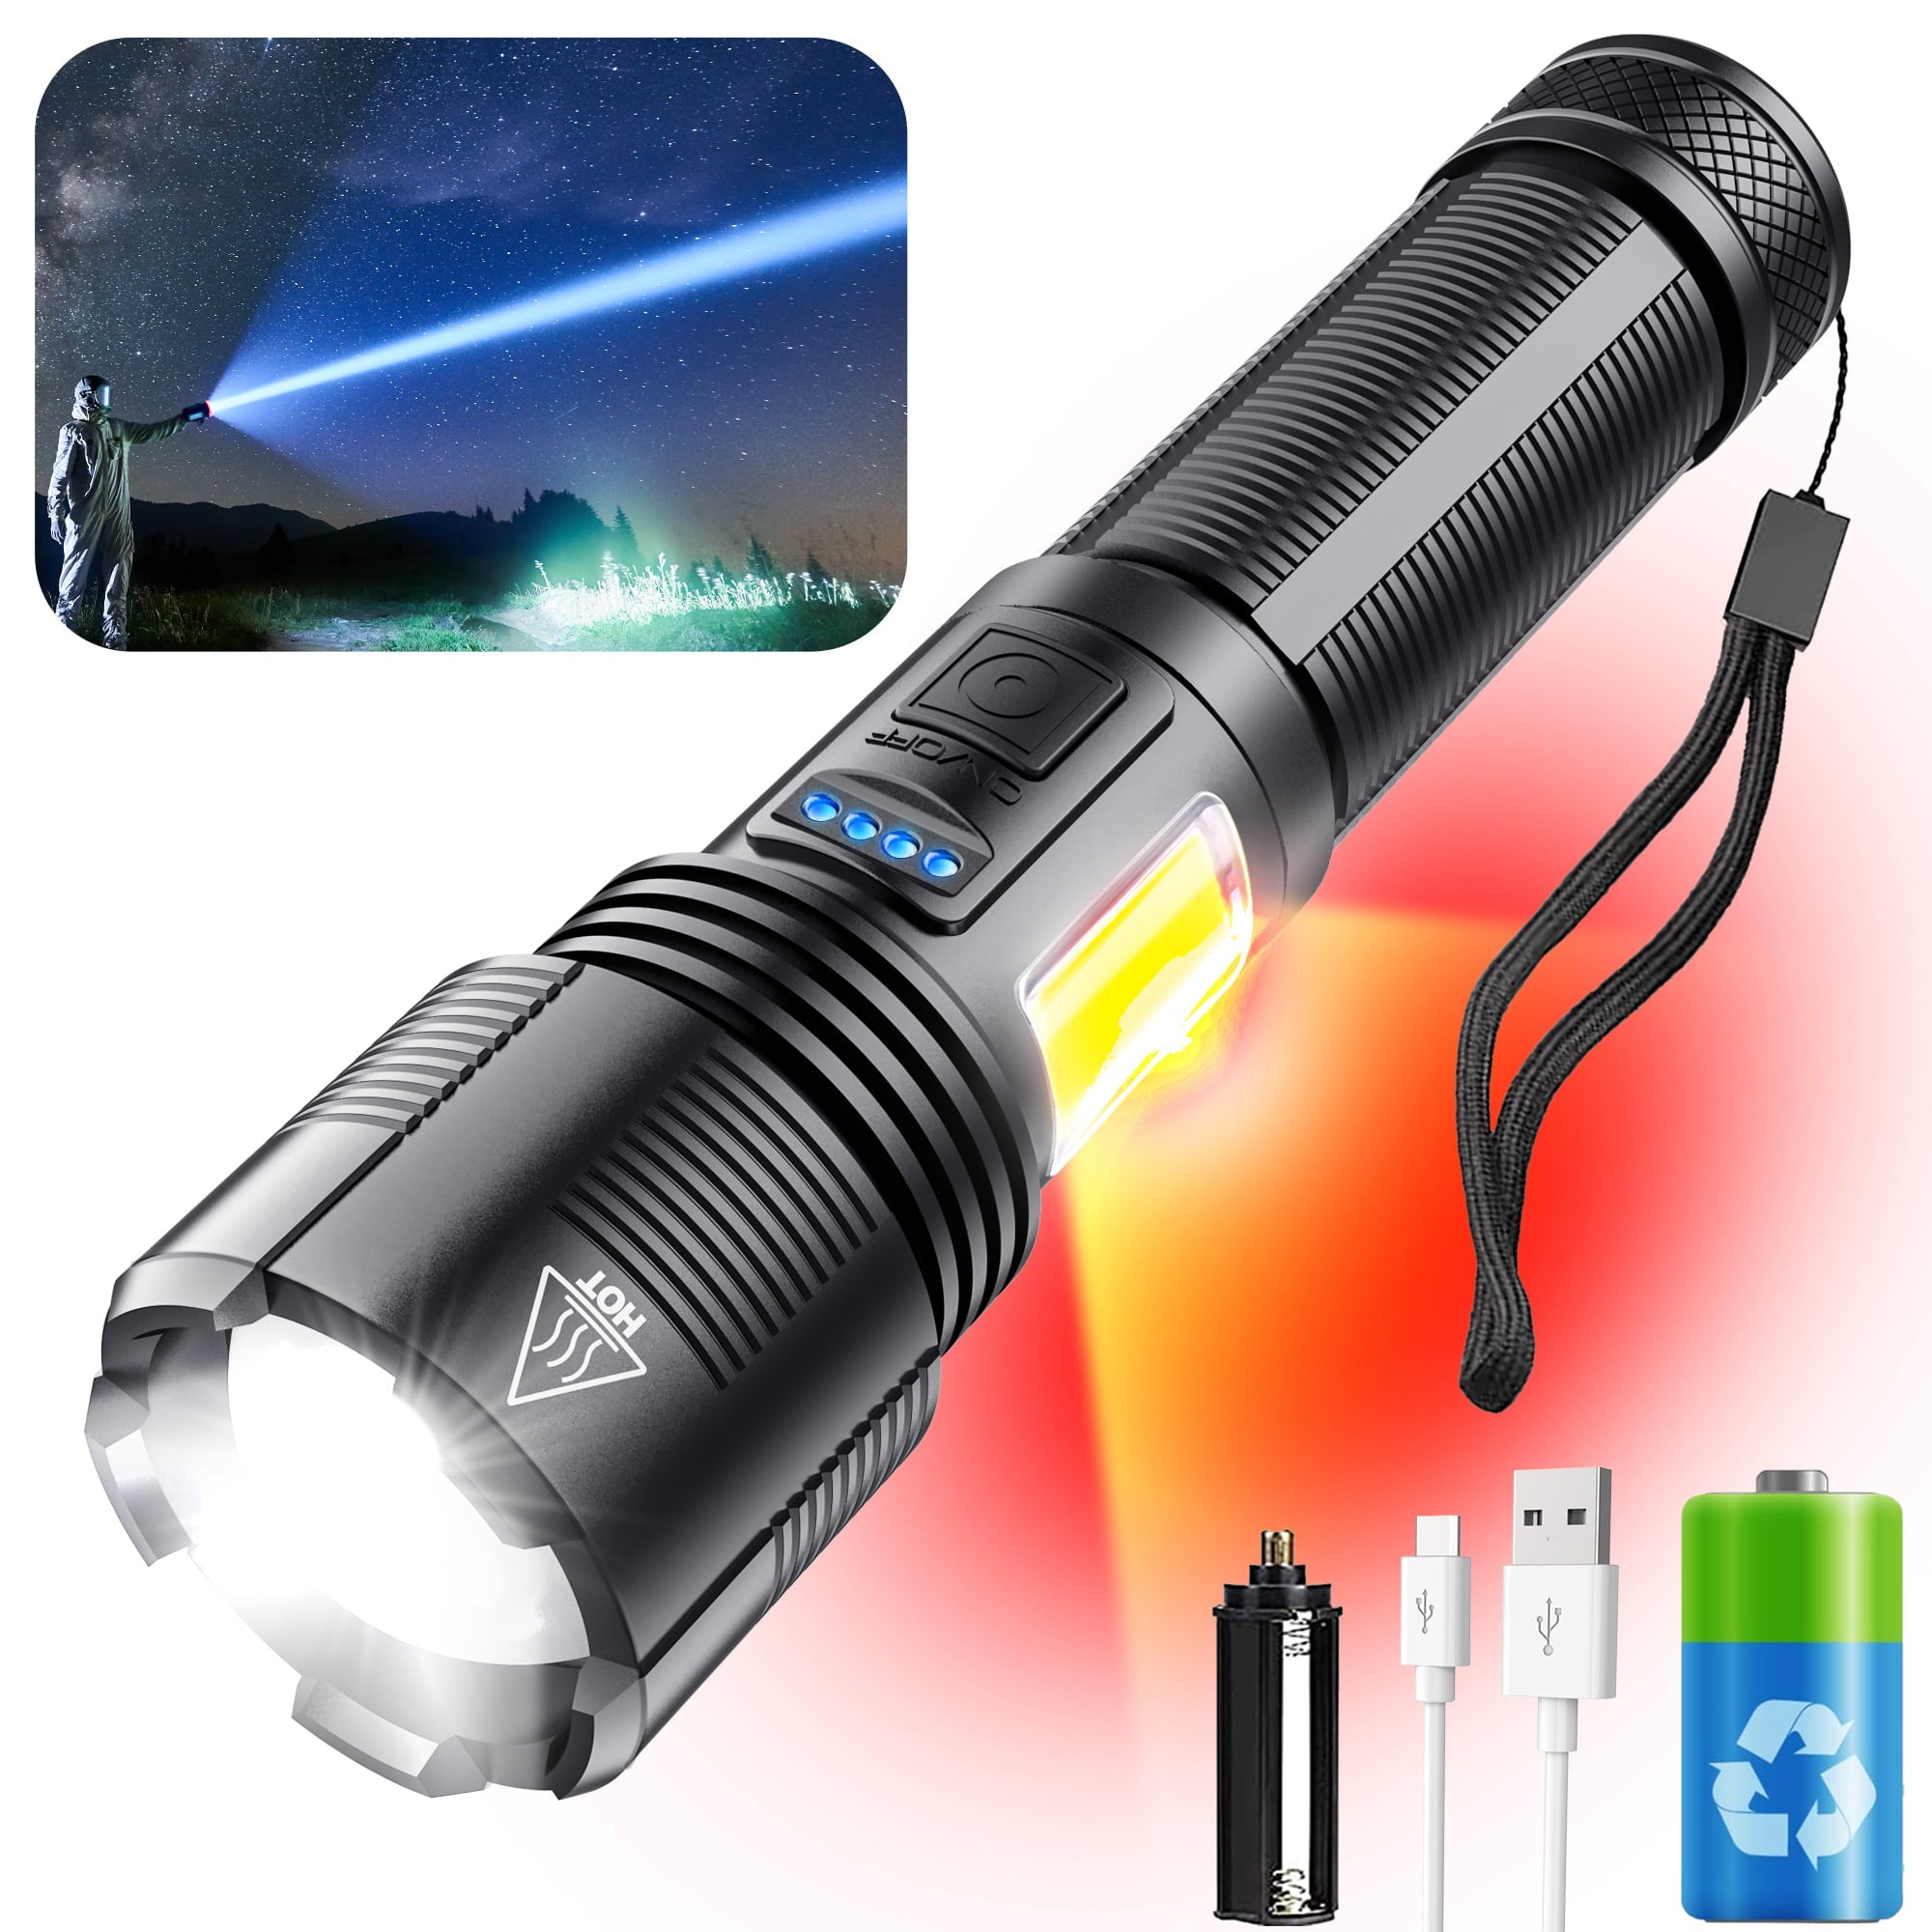 90000 Lumen Rechargeable Flashlight, 6 Modes with Red Warning Emergency Light, IPX6 Waterproof Powerful Flashlight, Rechargeable Battery Built-in